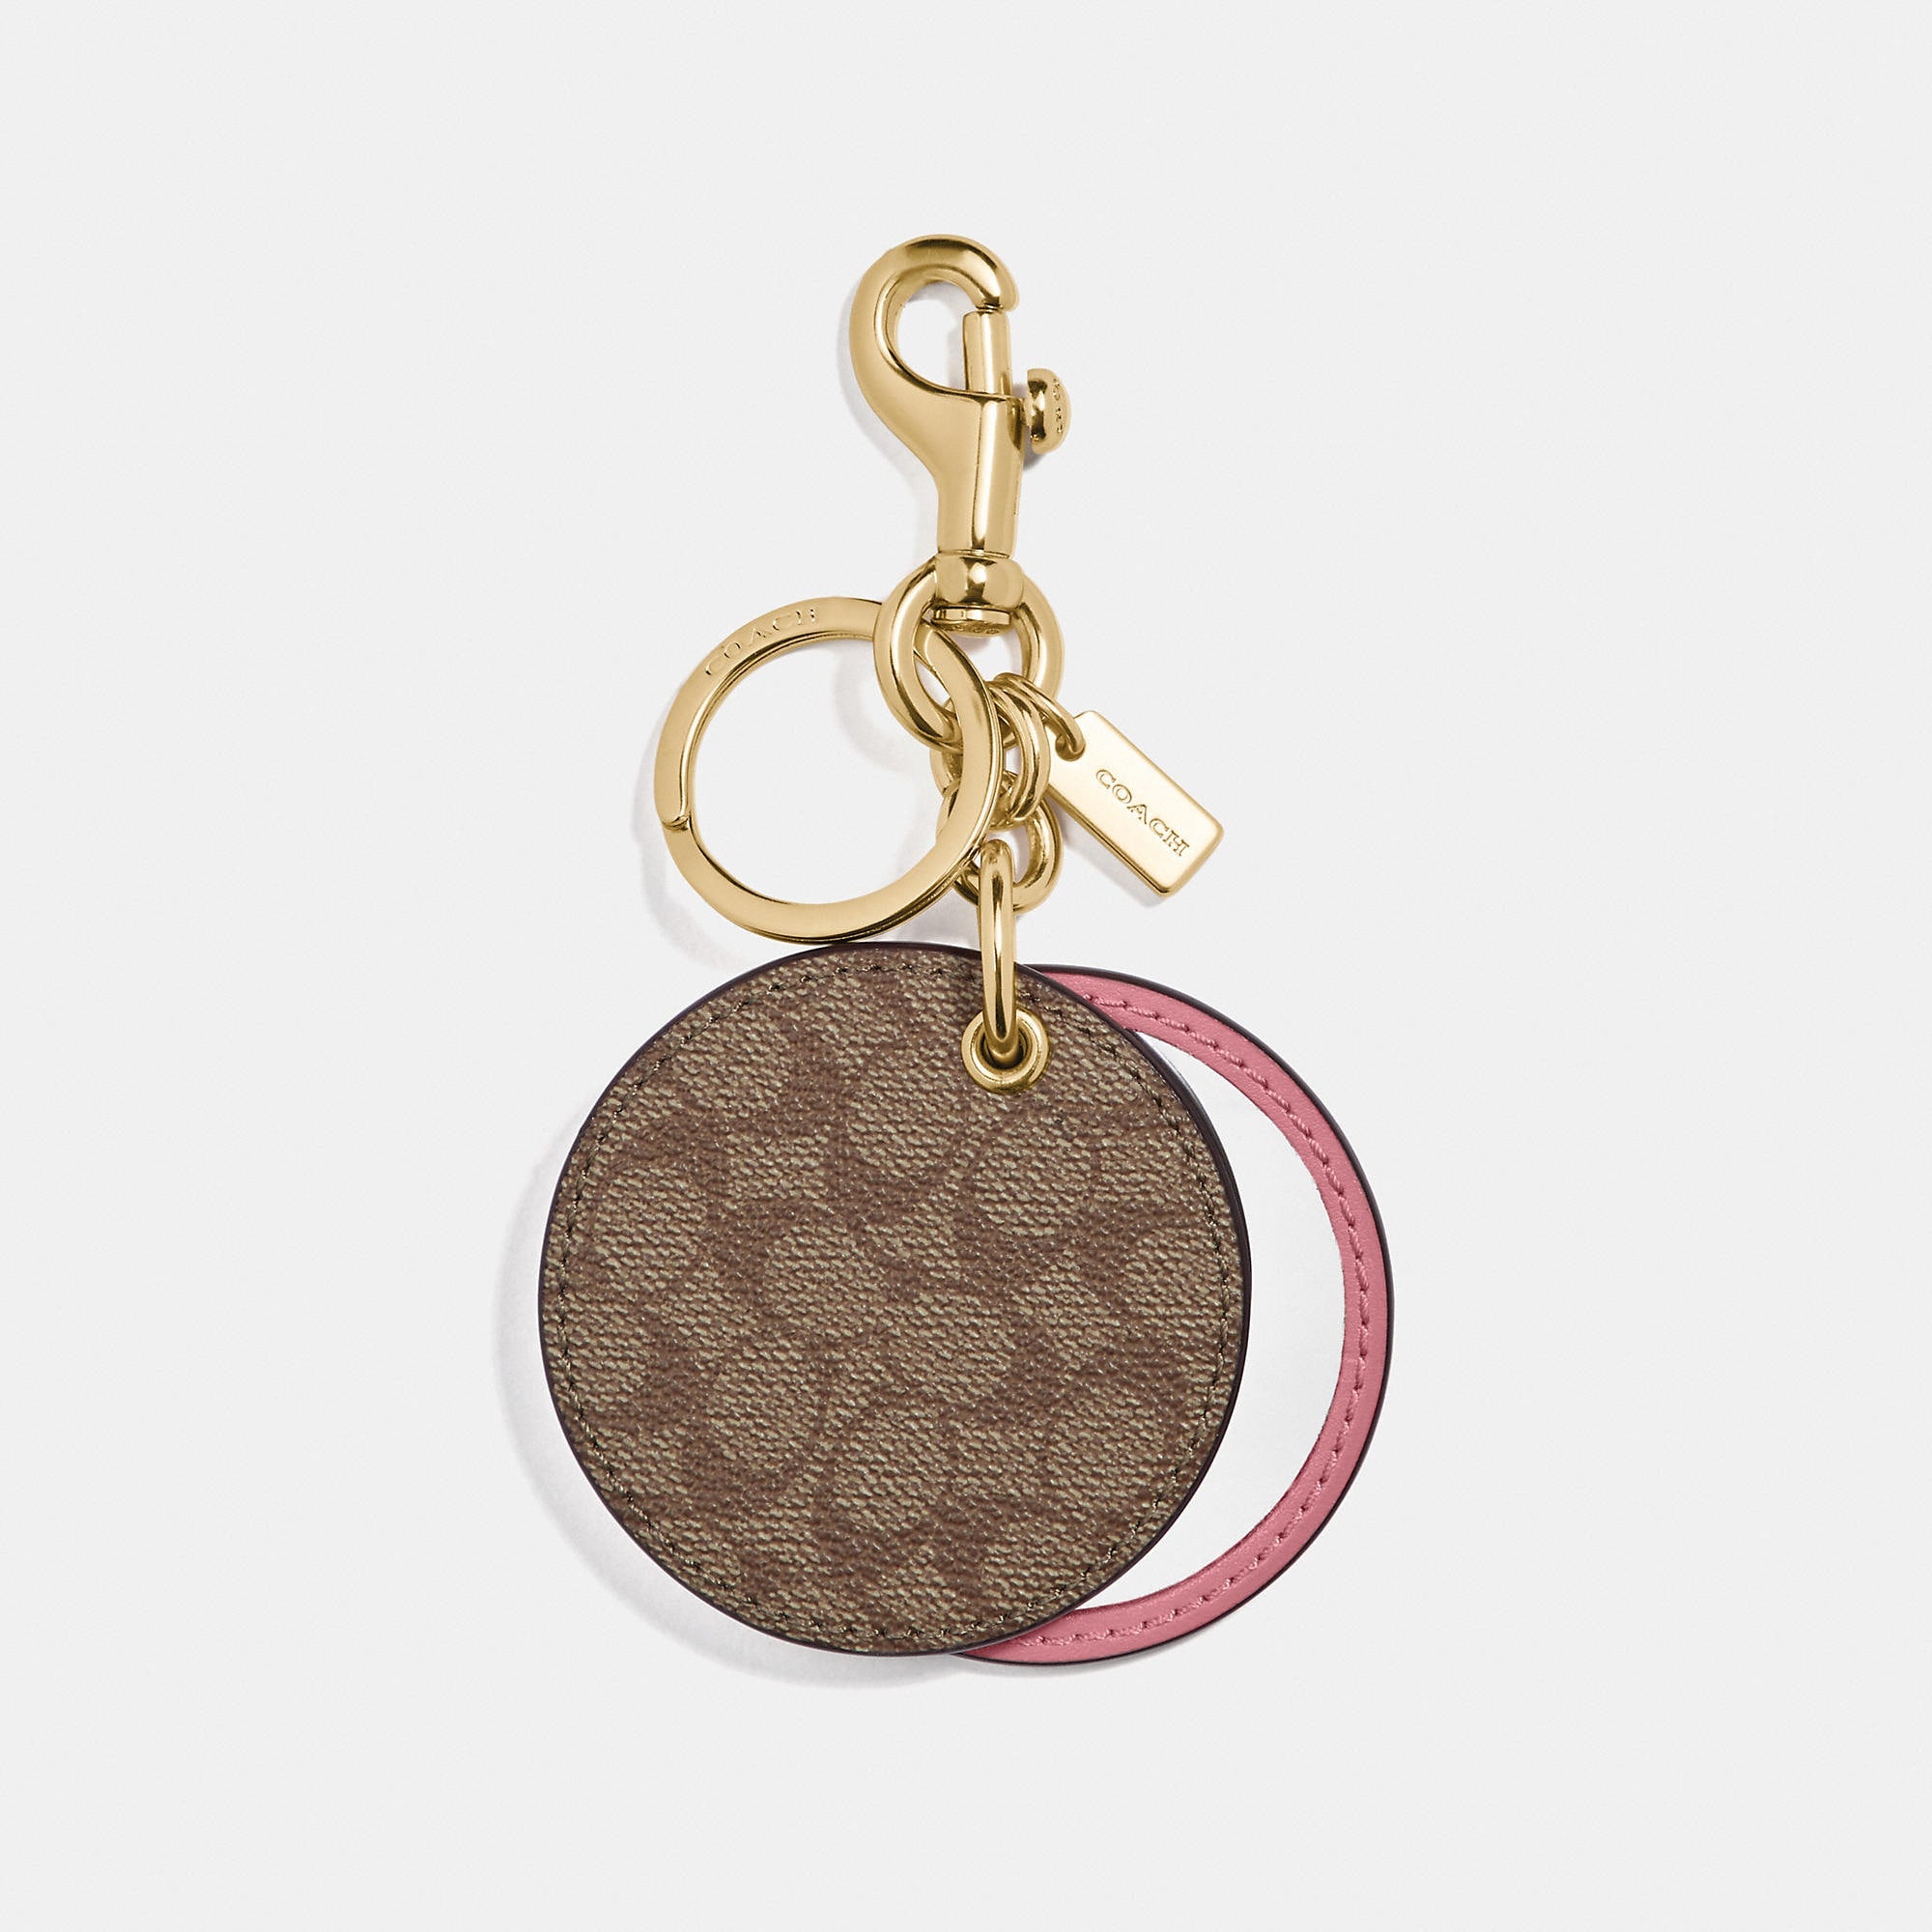 Coach Outlet Mirror Bag Charm In Signature Canvas